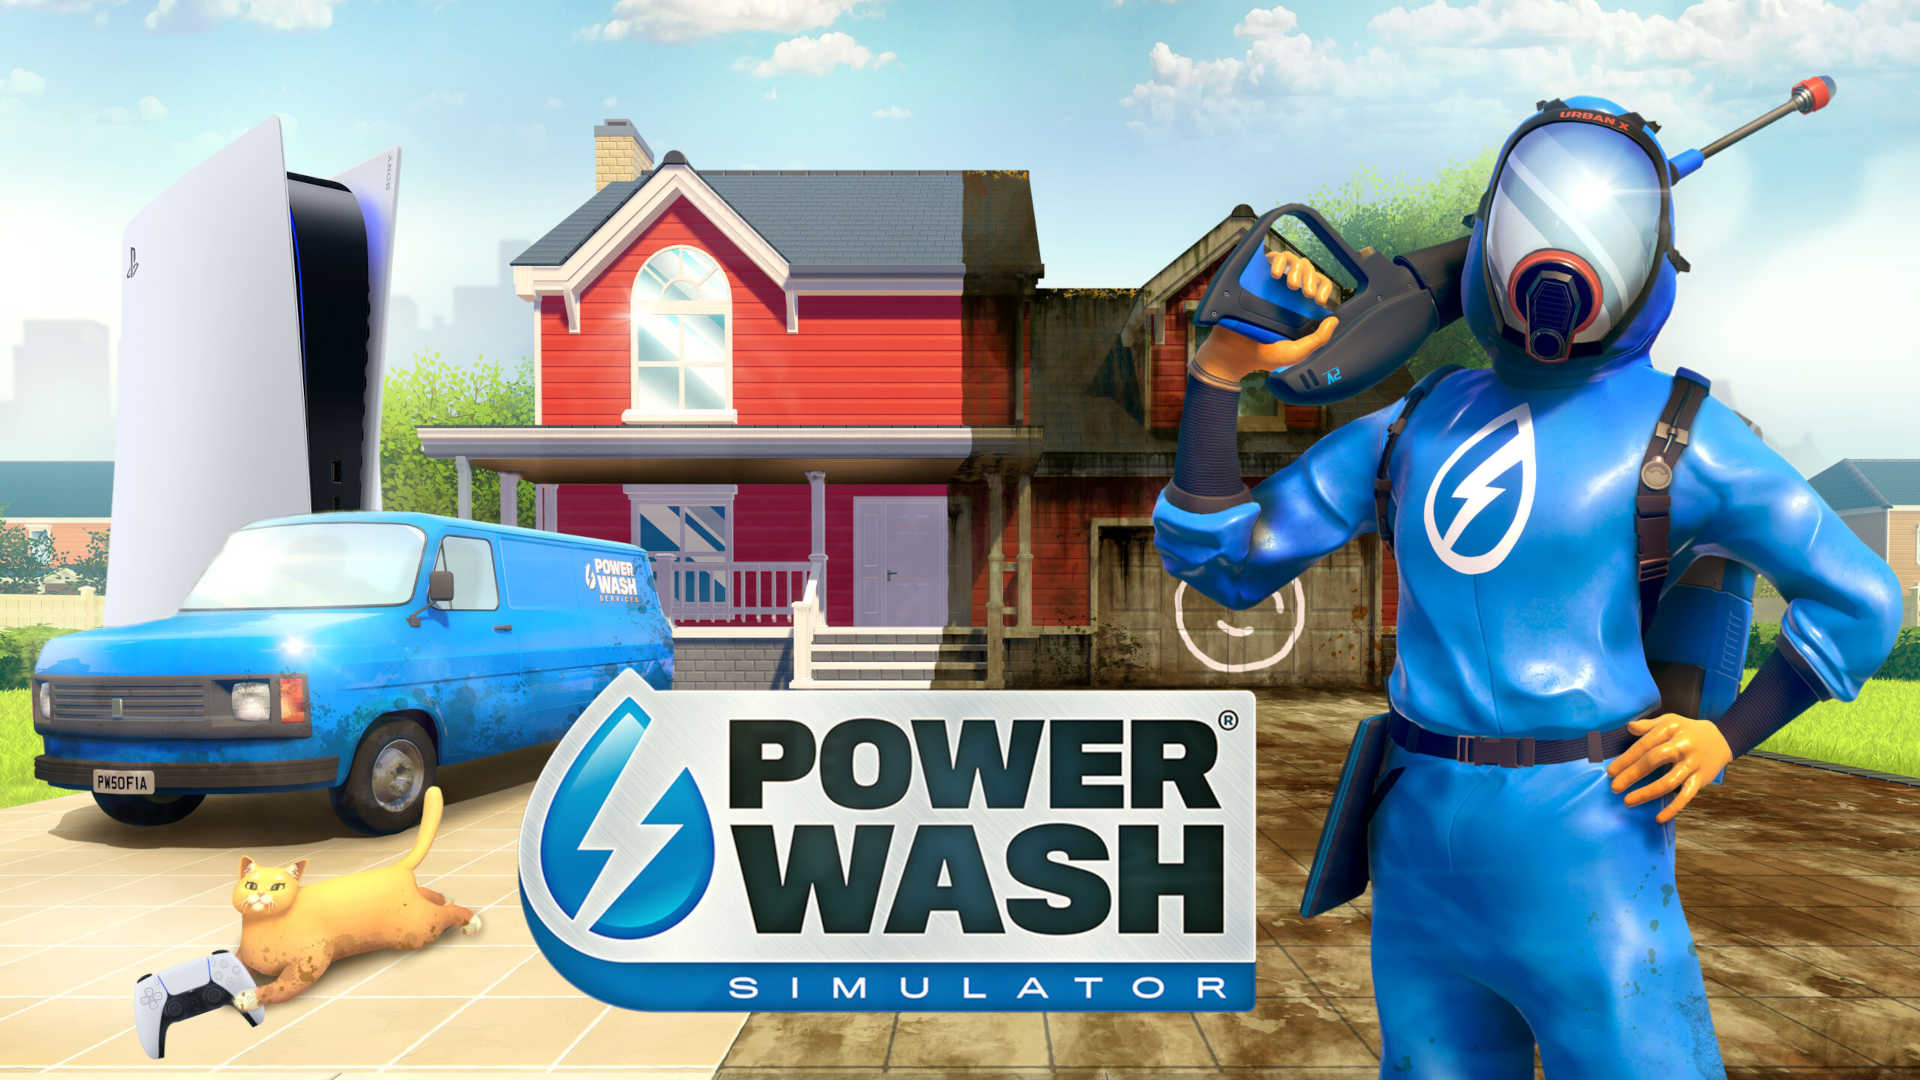 Time to power wash your car with PS Plus monthly games